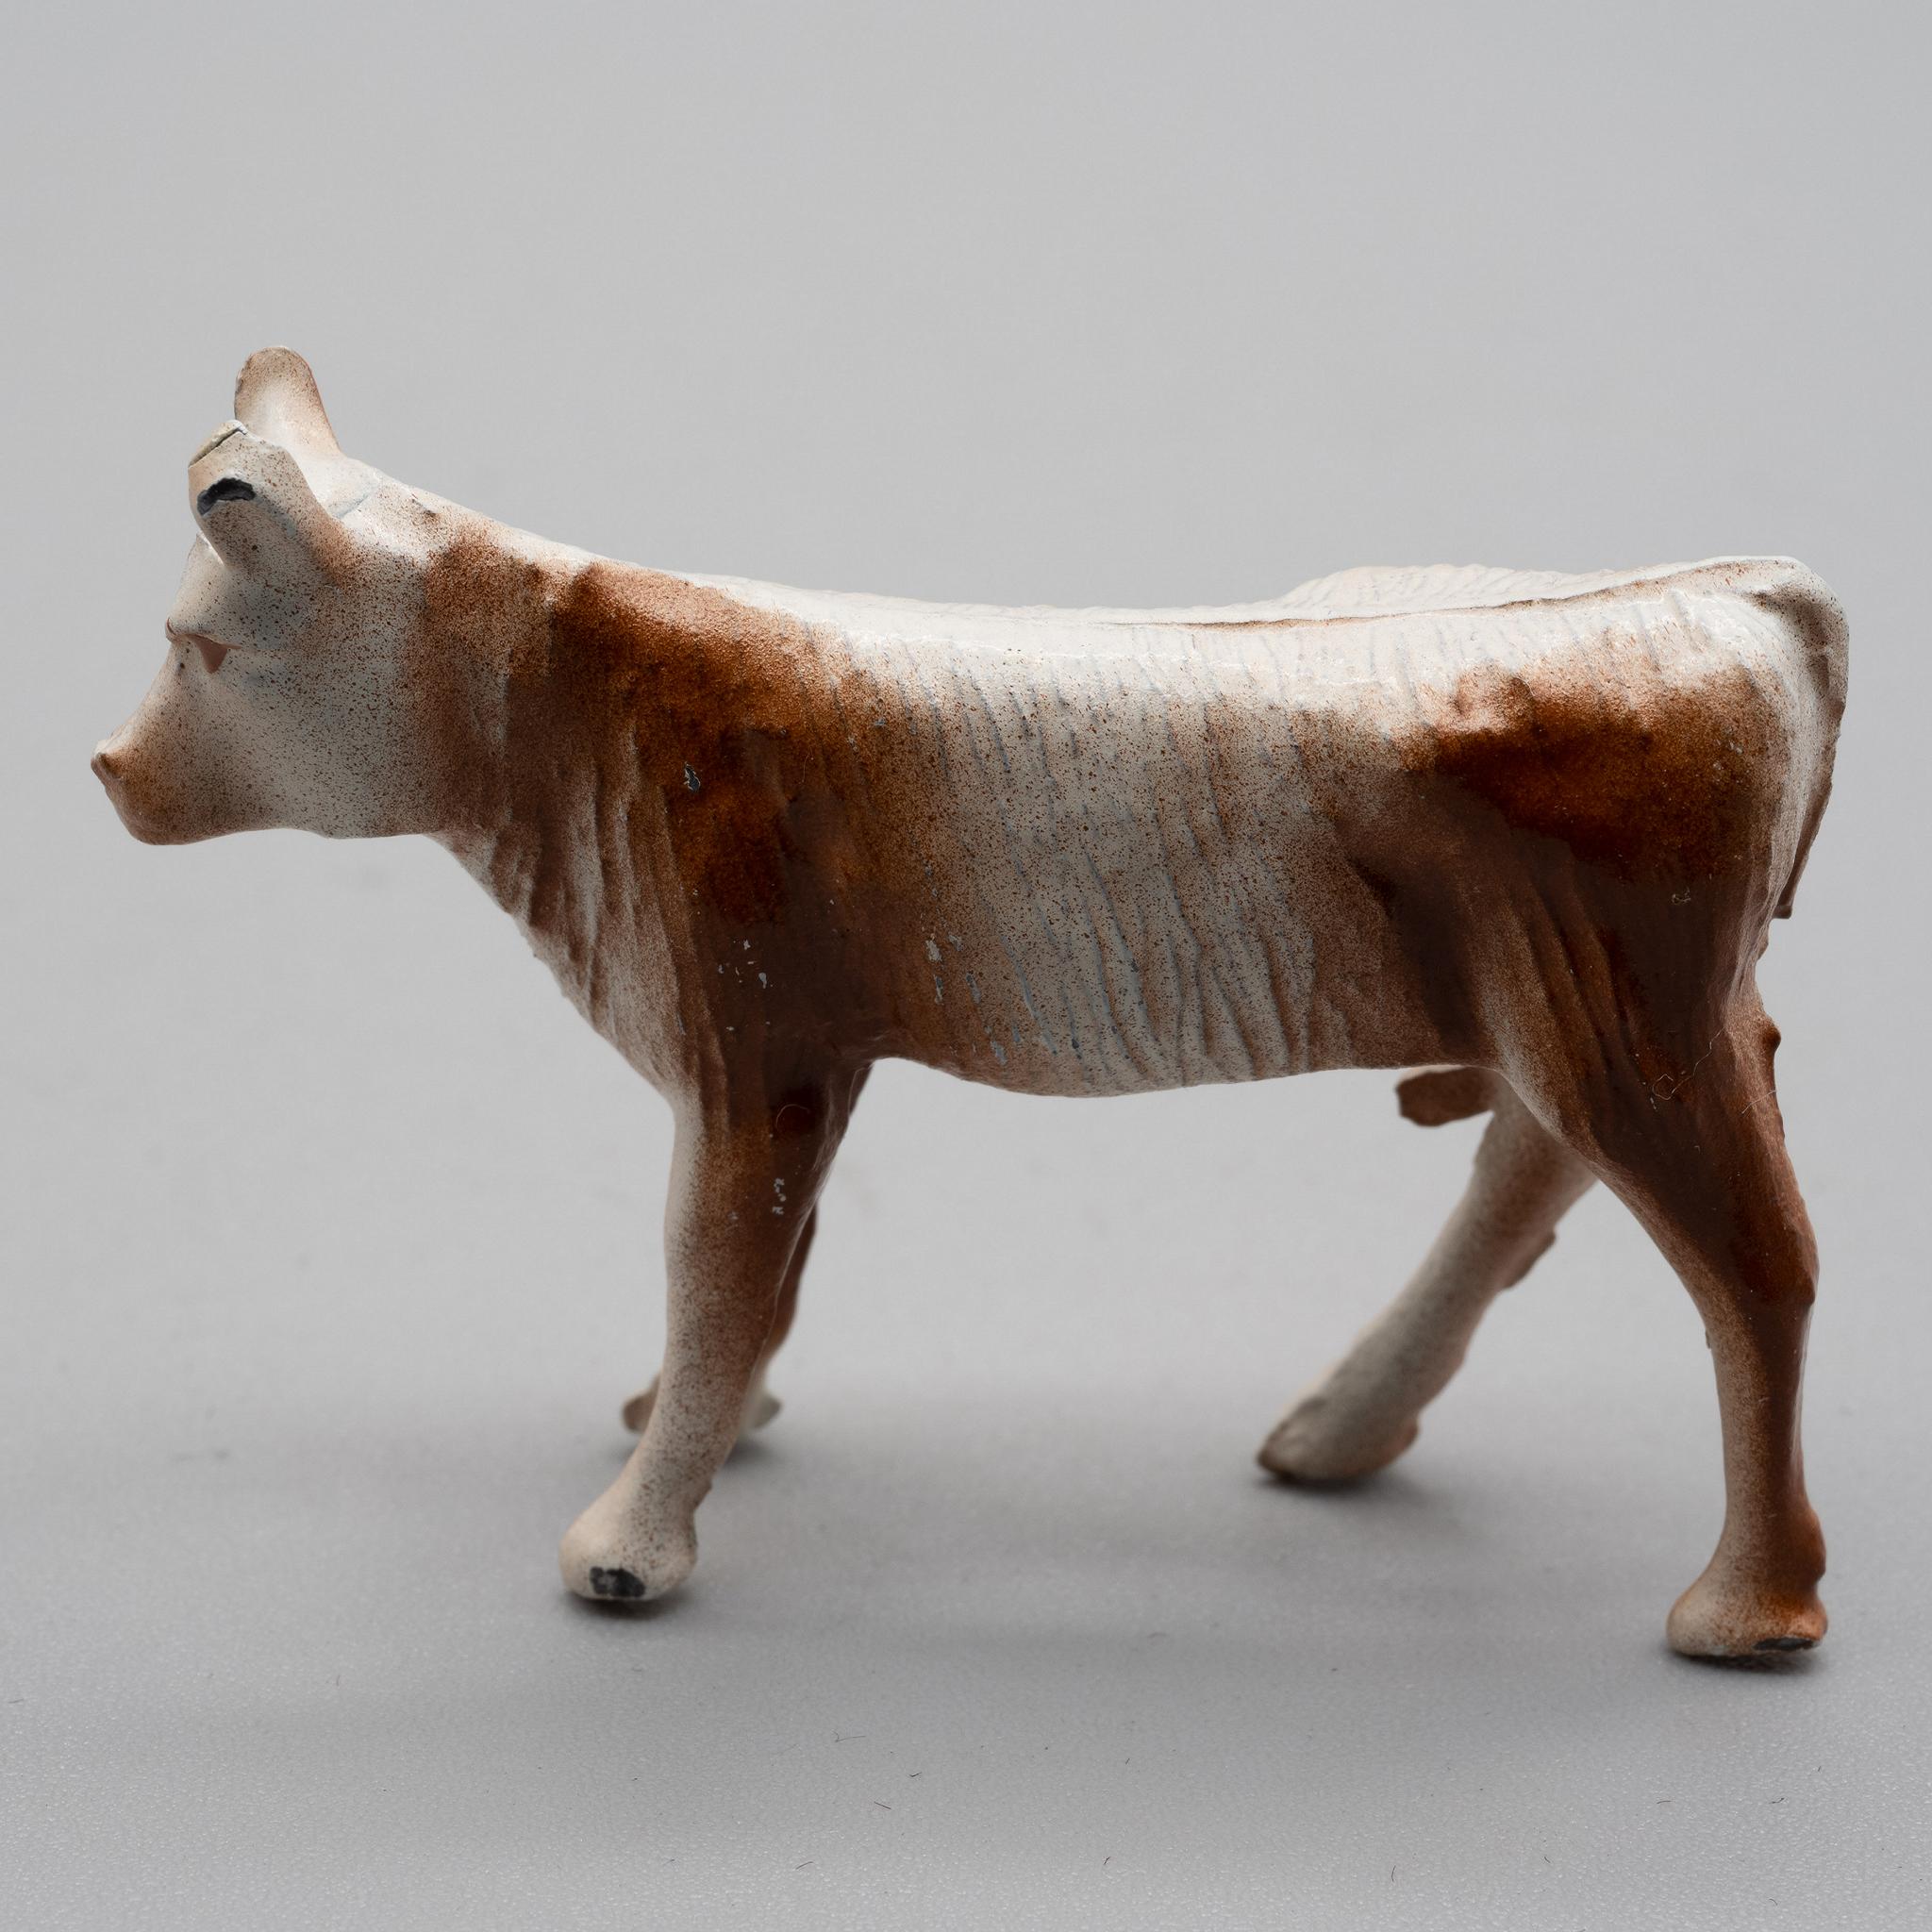 Lead+Calf+Farm+Animal+Toy+by+Crescent+England picture 2